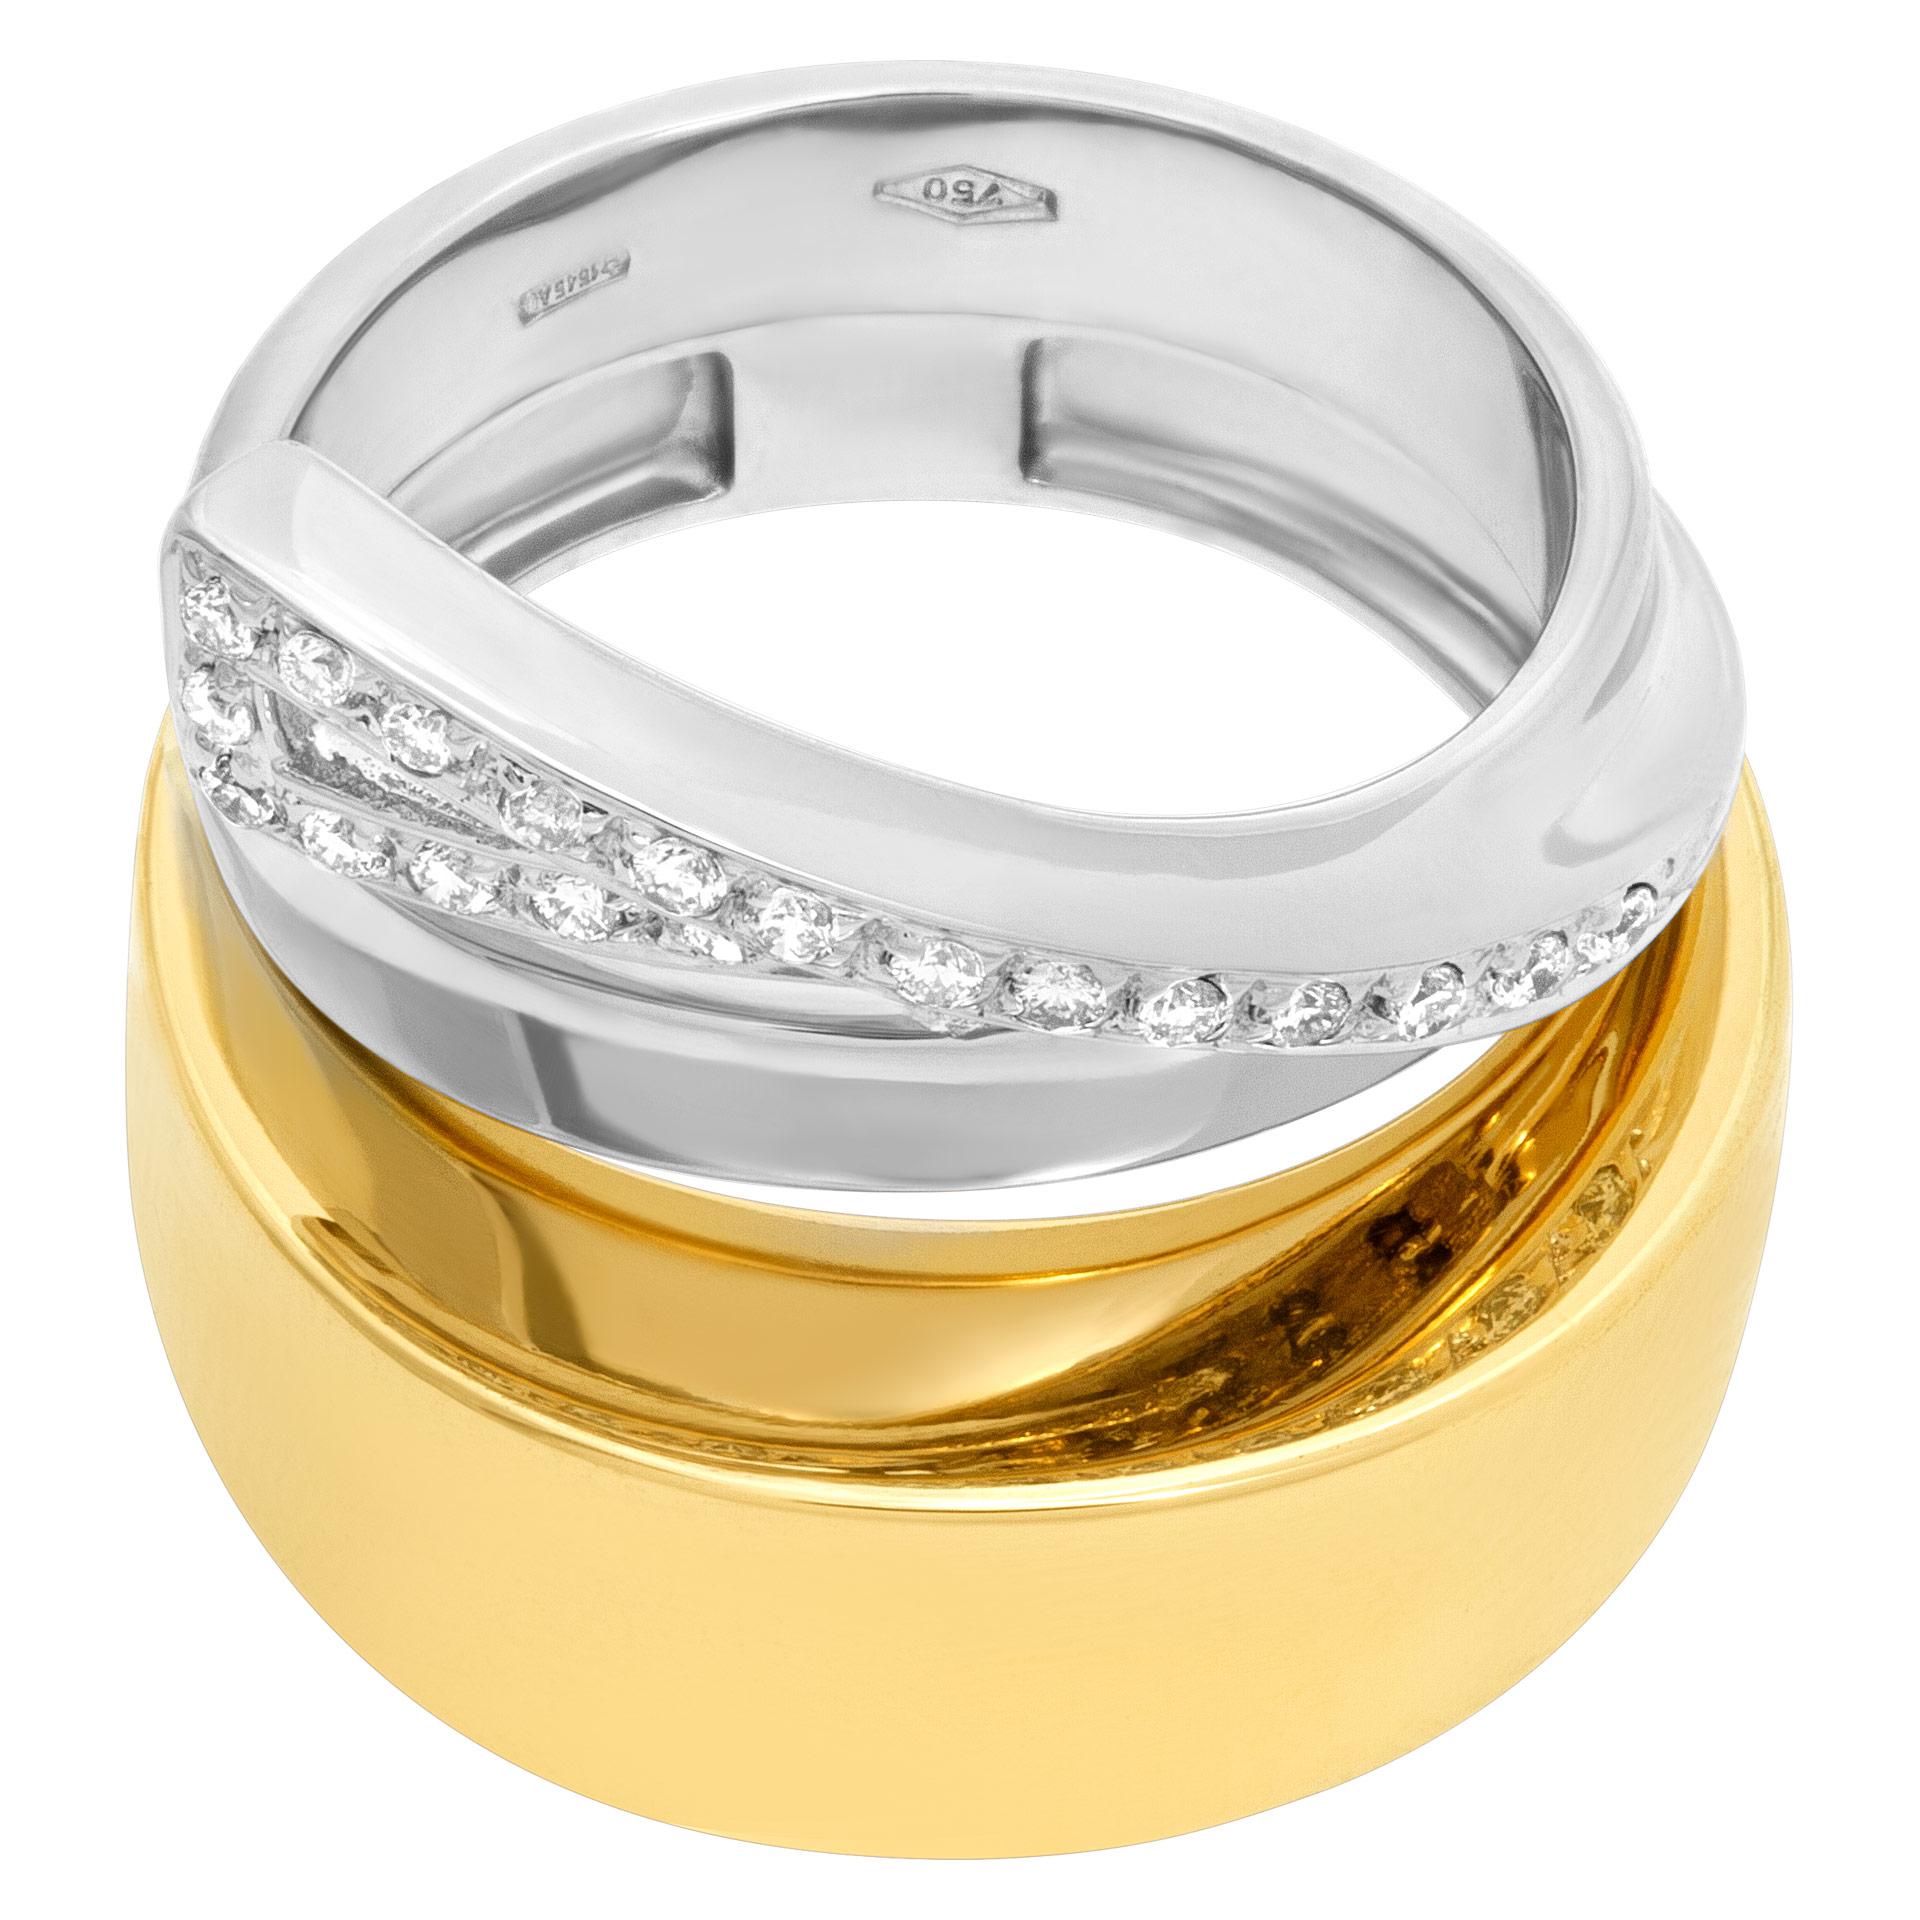 Women's Ring in 18k White and Yellow Gold with Diamond Swirl, Stack Design For Sale